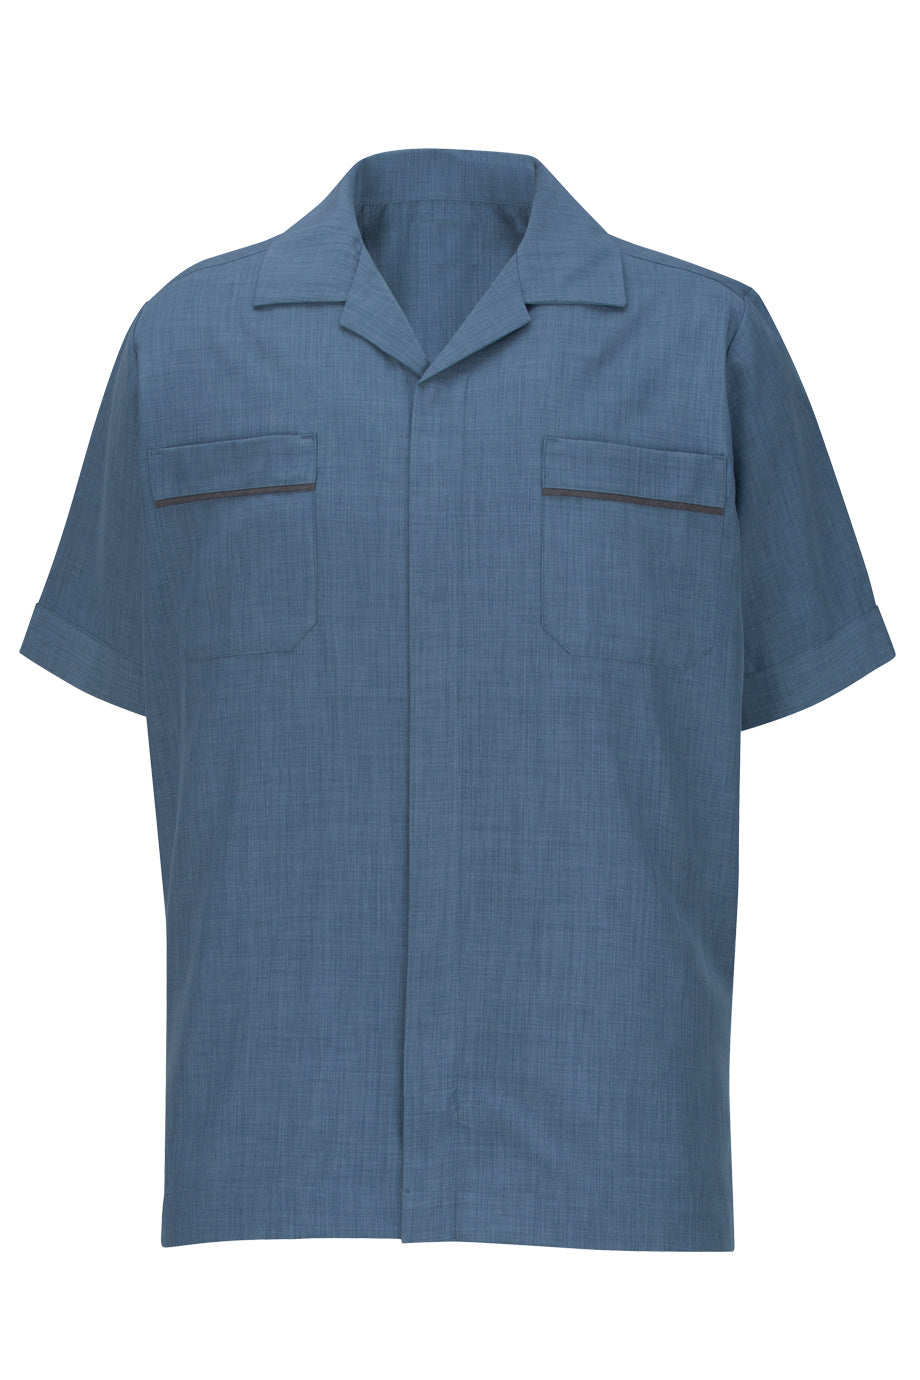 Men's Housekeeping Button-Down, Riviera Blue [Left Chest / VCL All White]